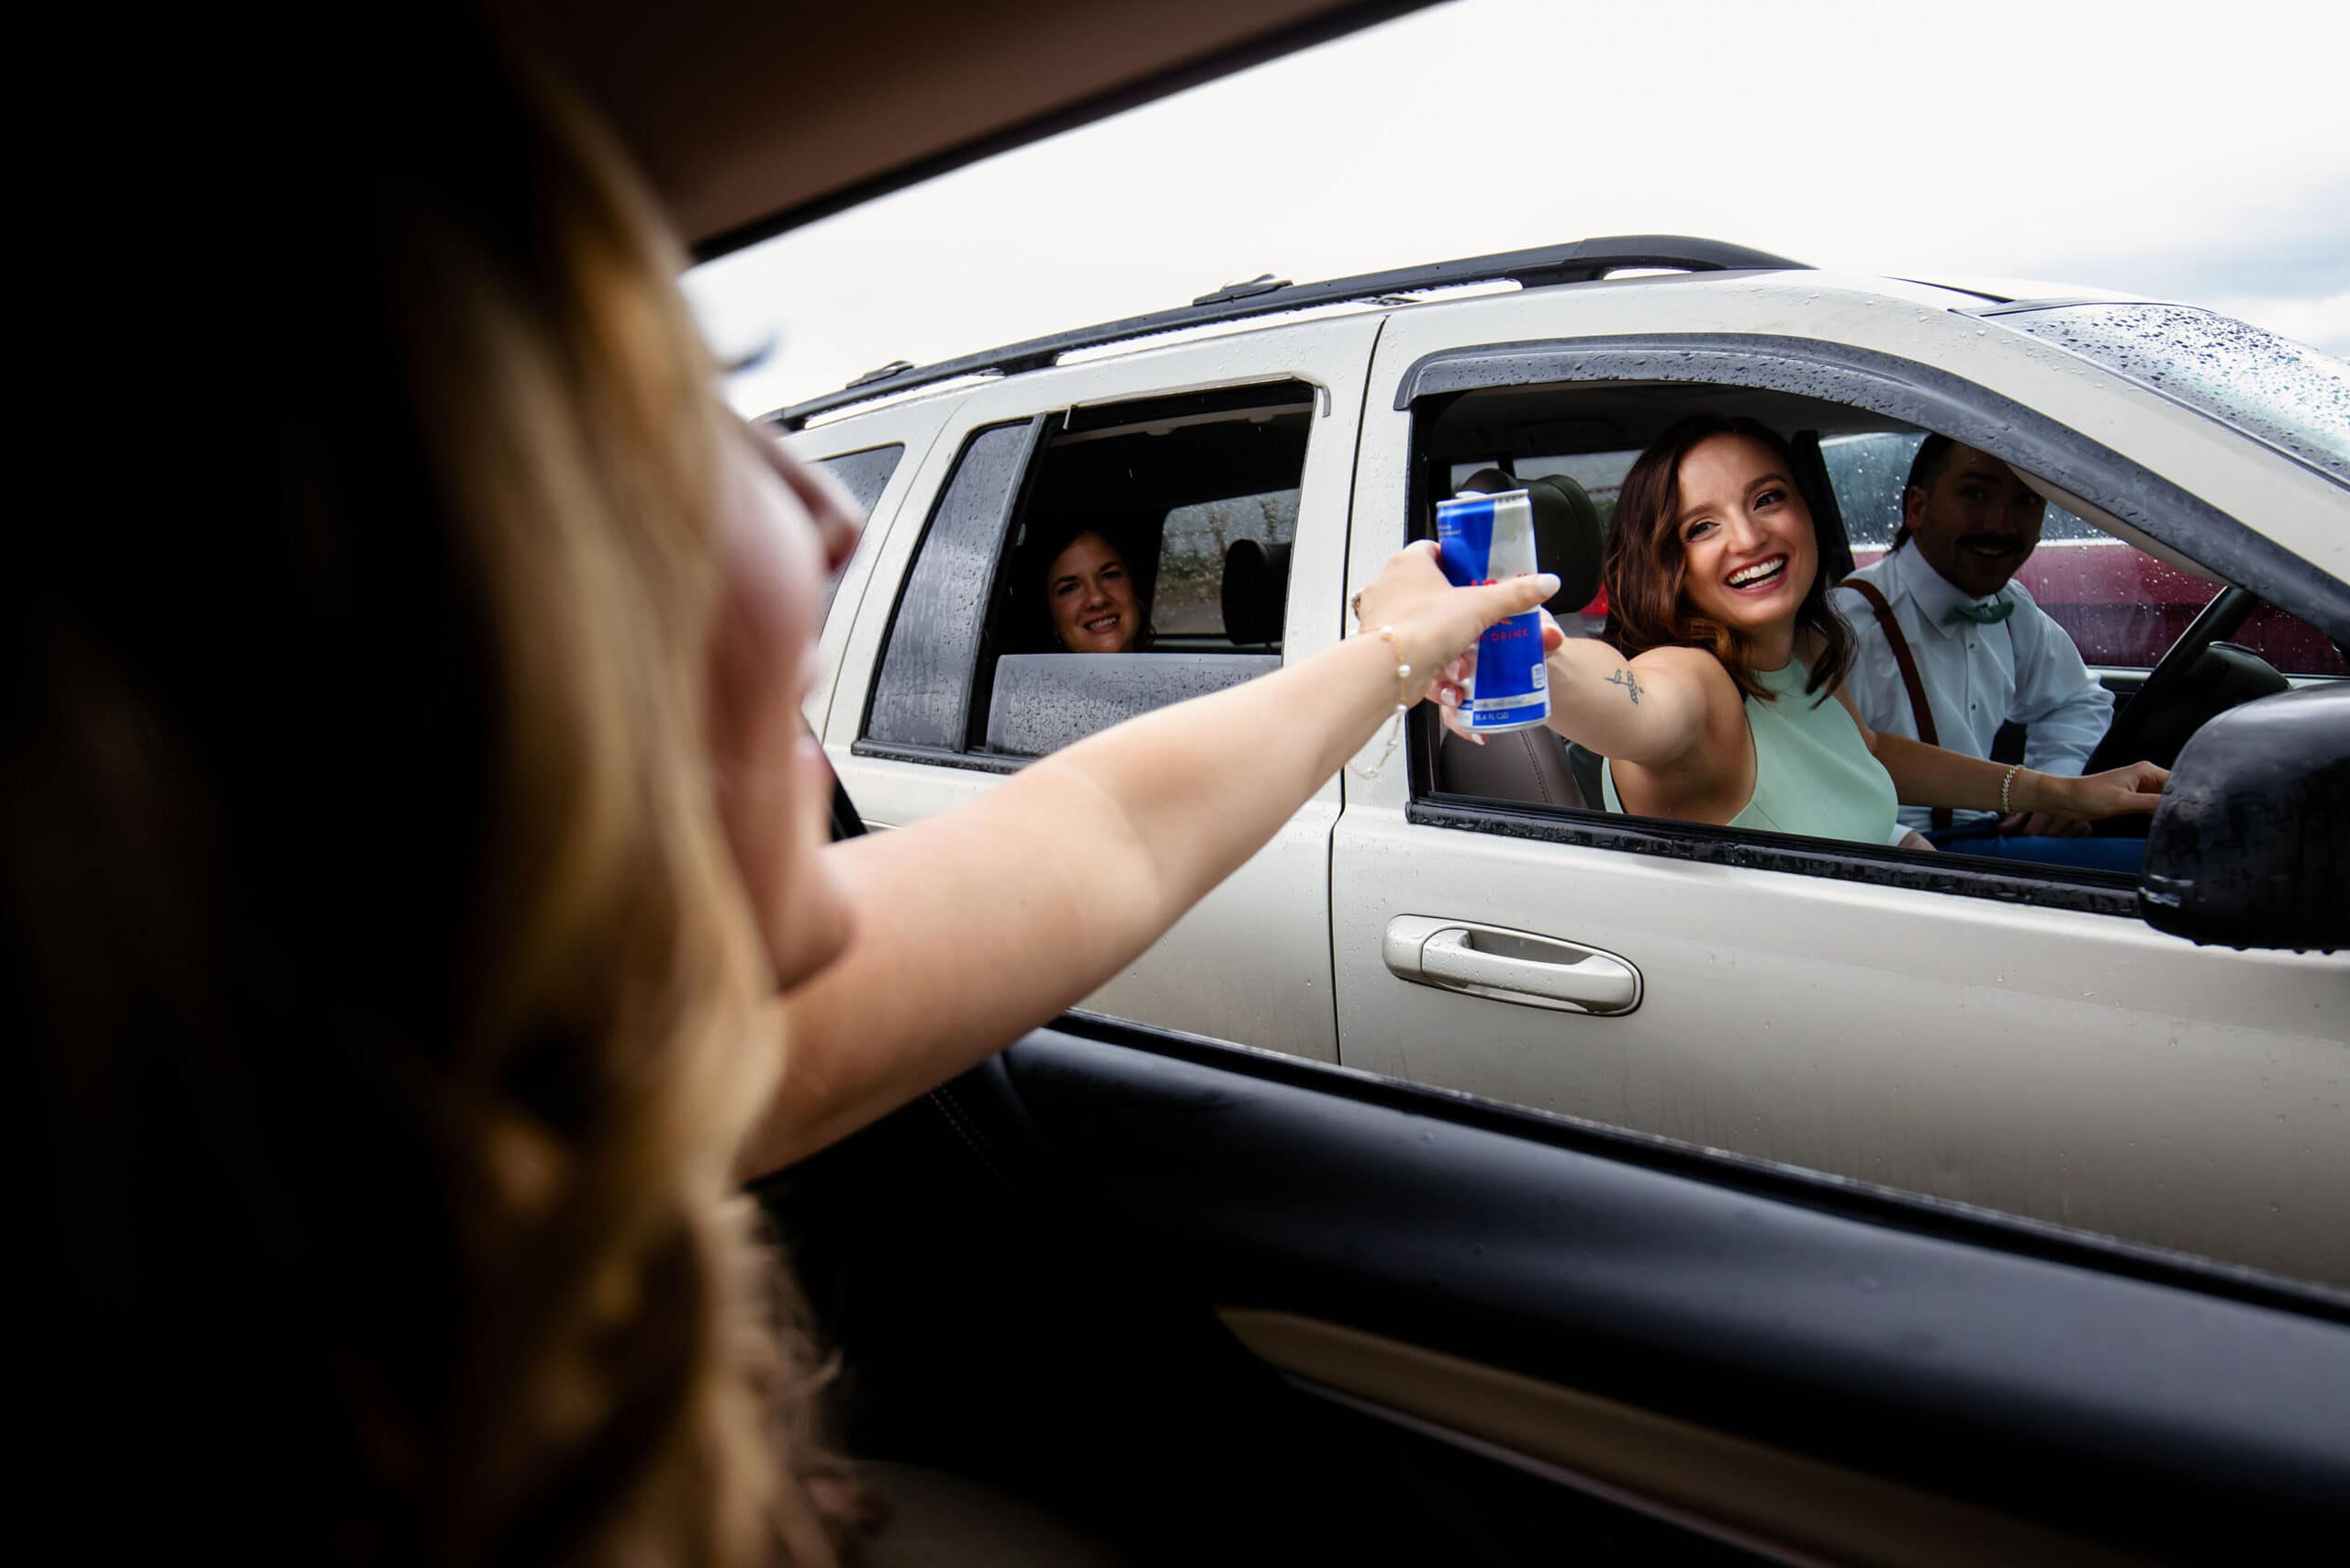 The bride reaches for a can of RedBull from a bridesmaid in the parking lot